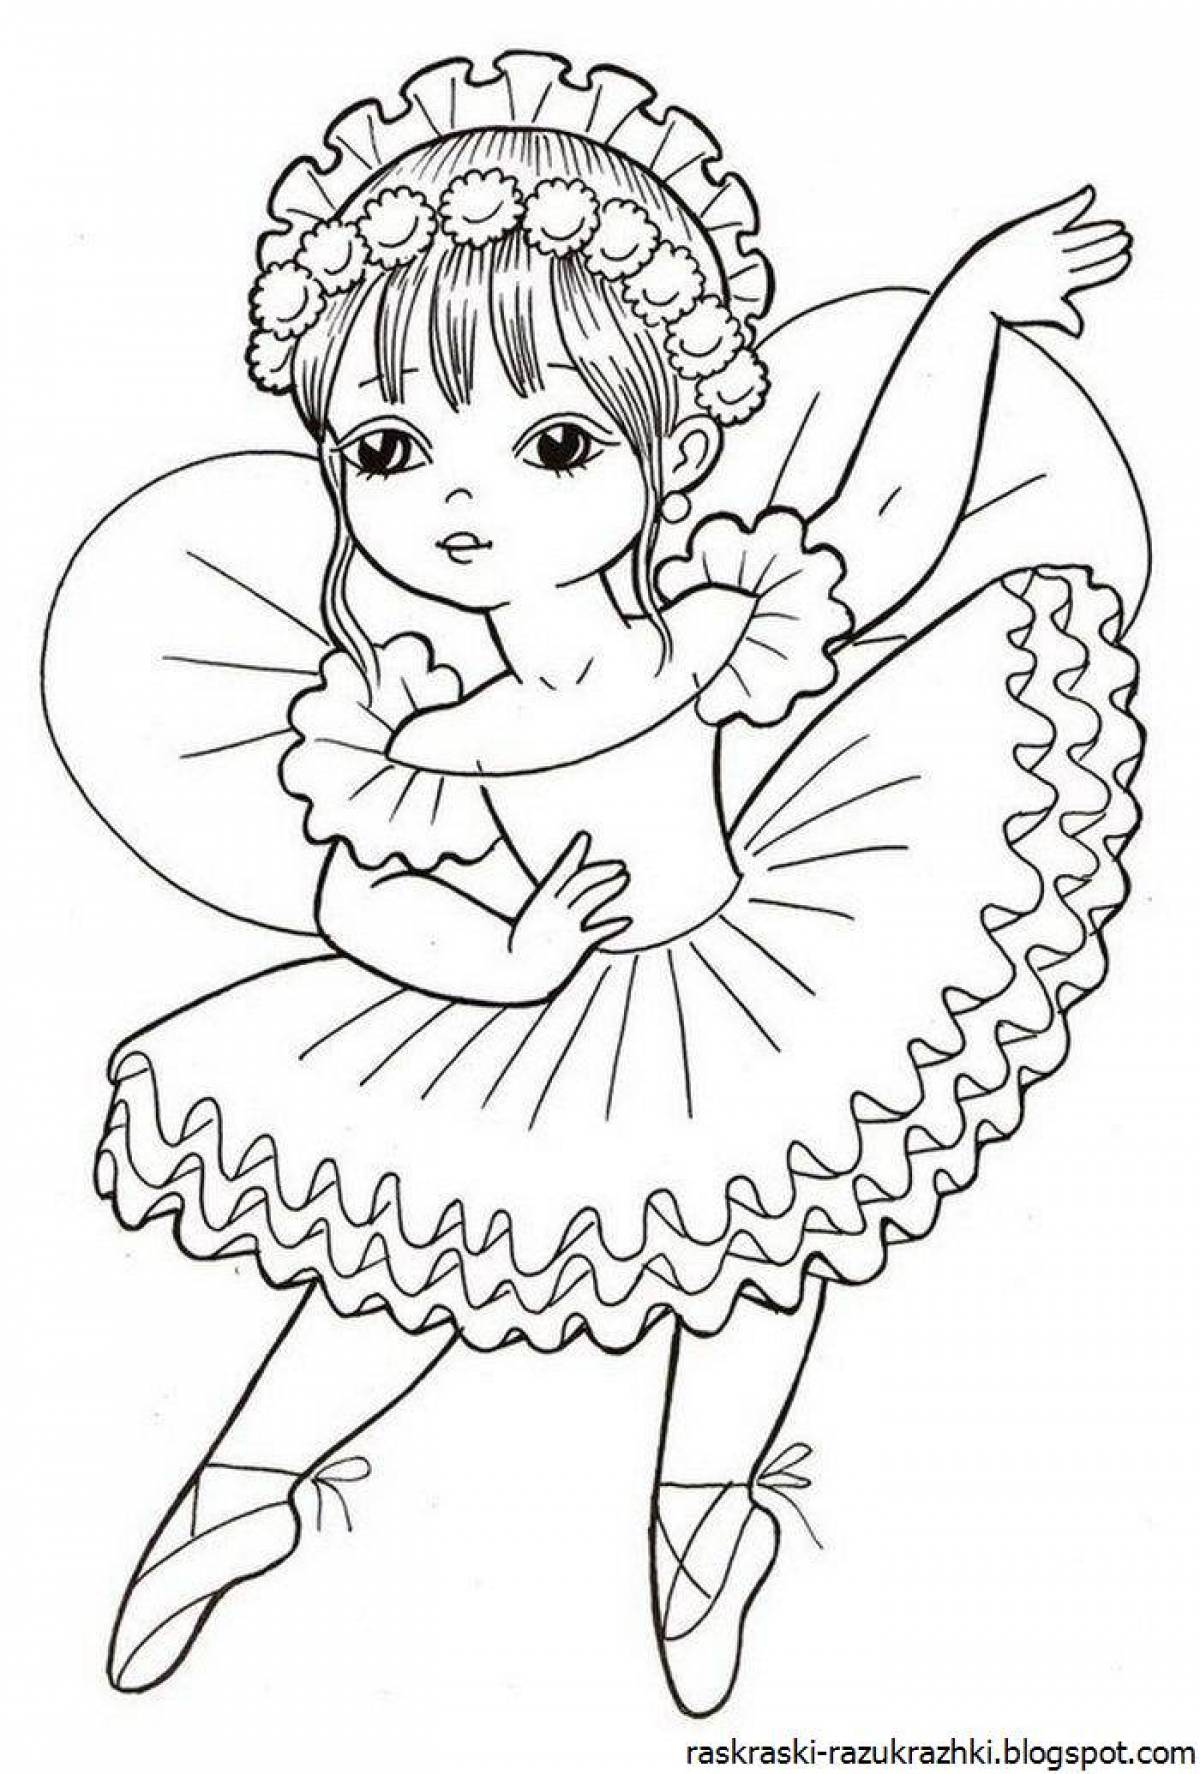 Playful ballerina coloring pages for kids